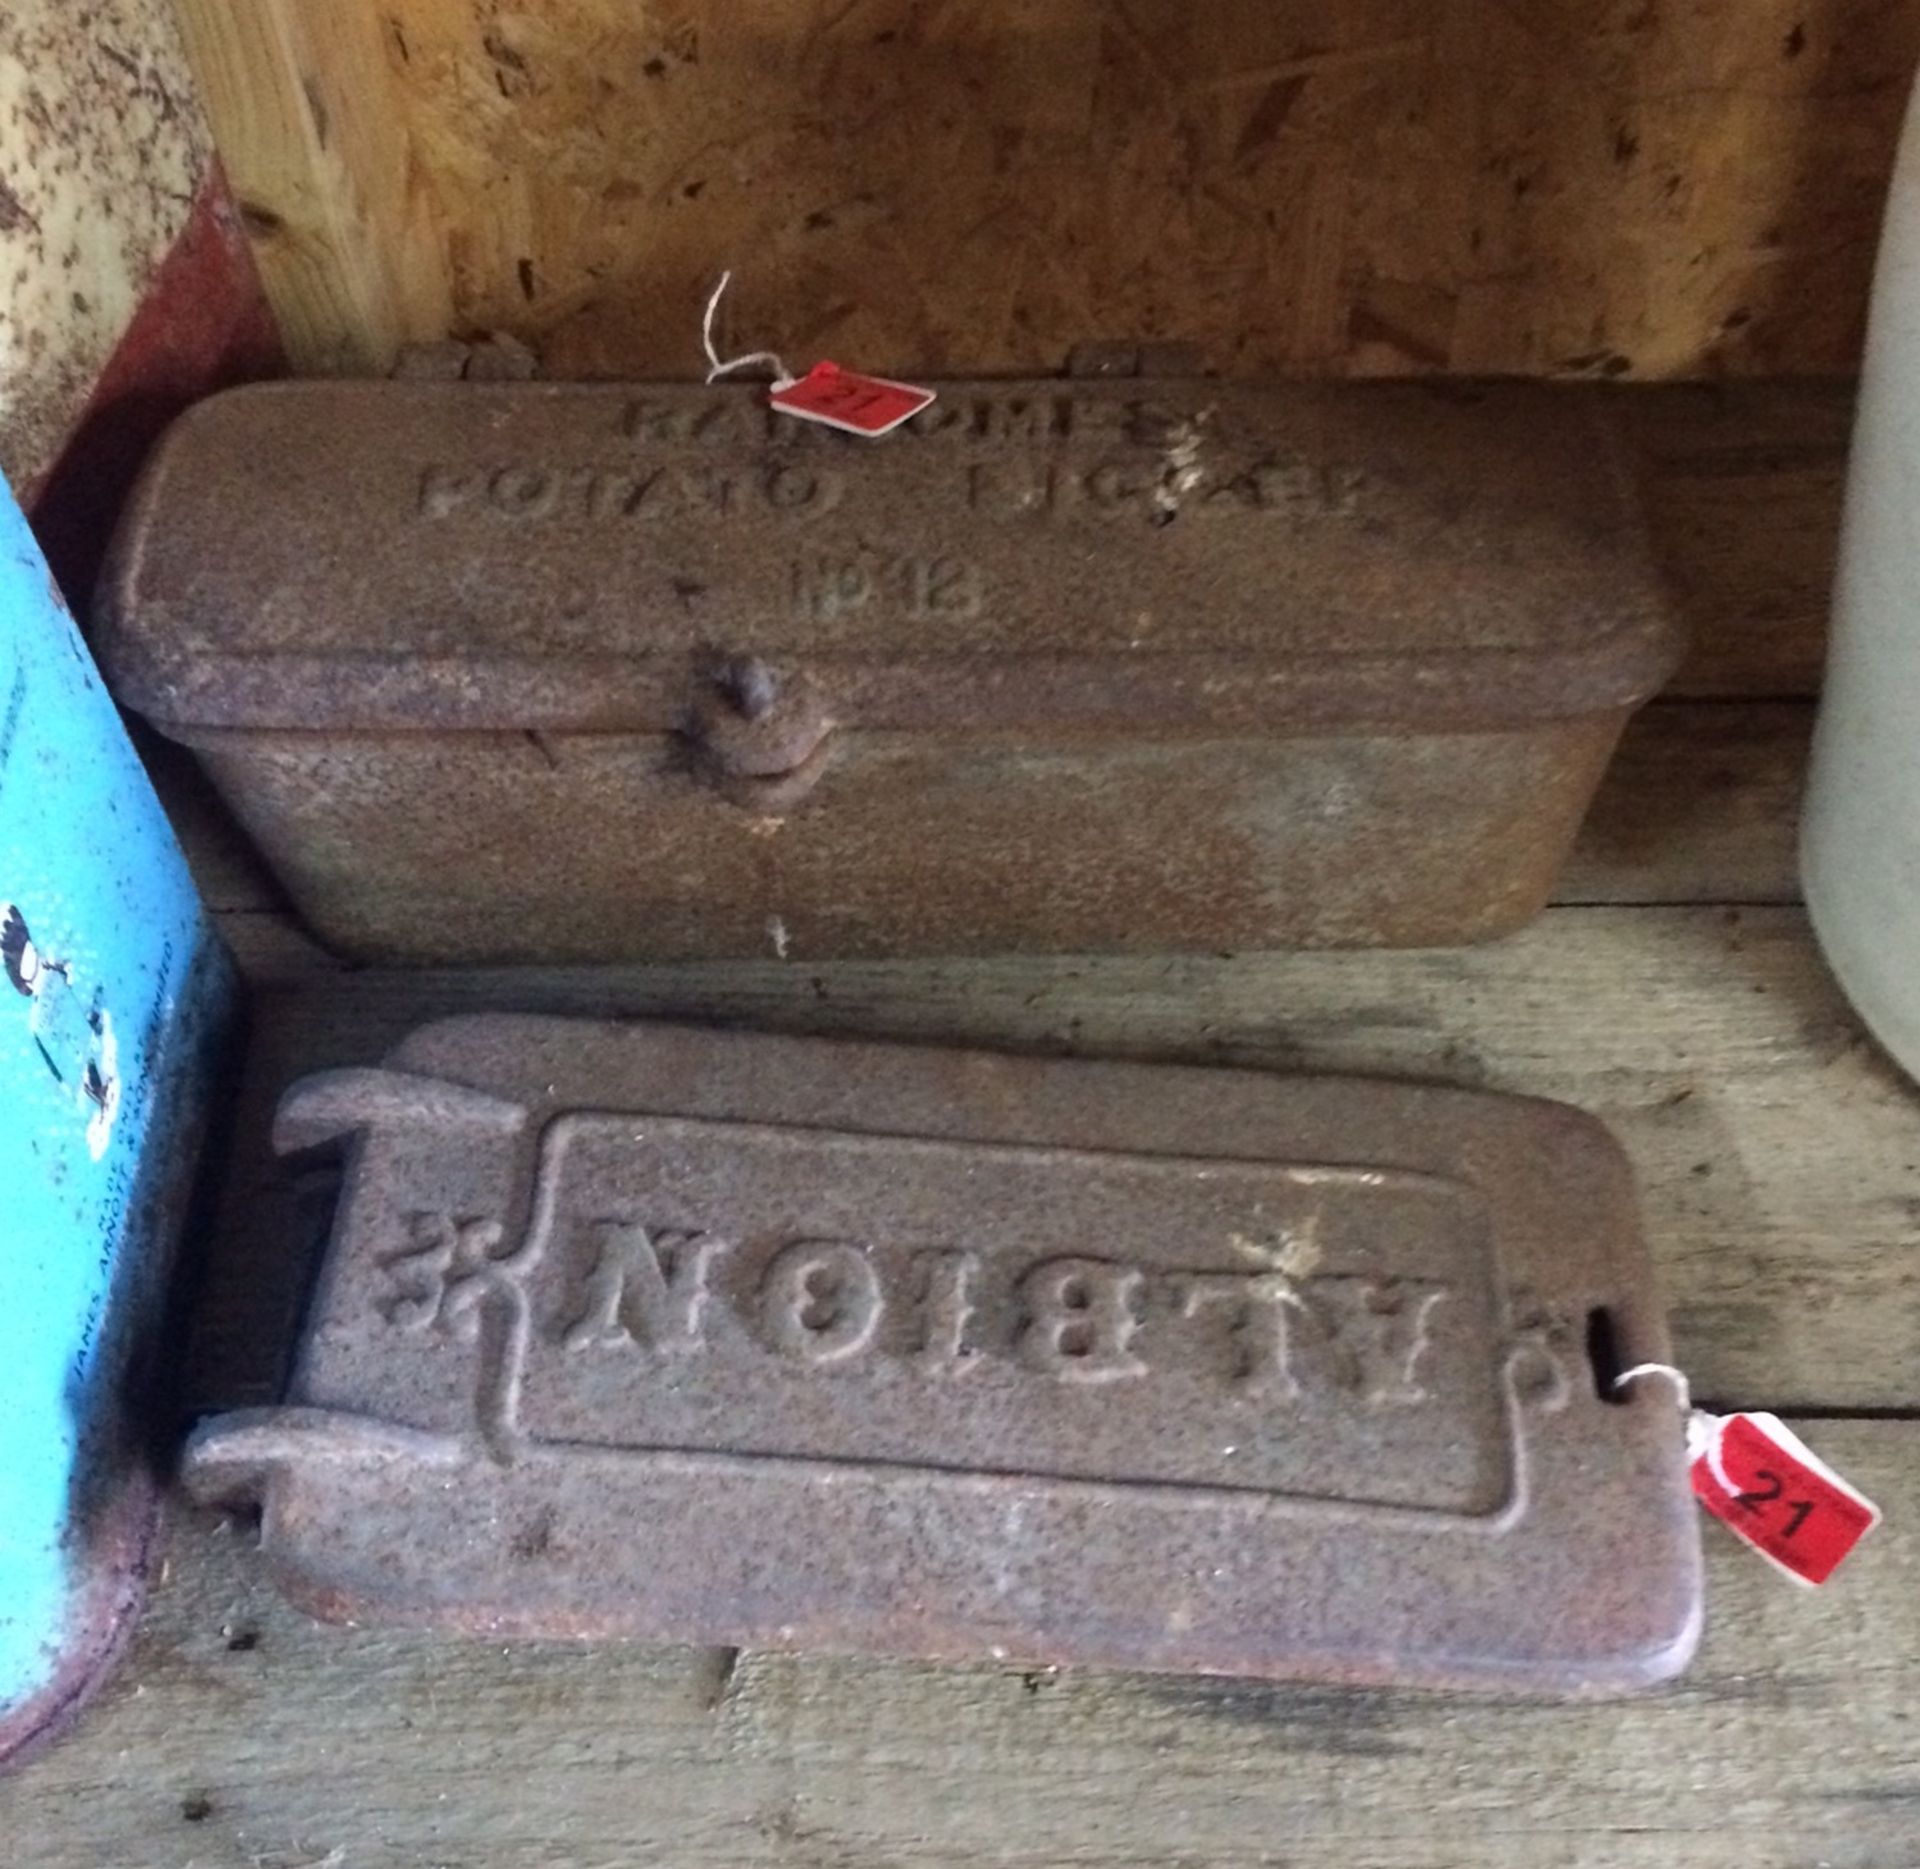 Ransome Tool Box and Albion Cast Iron Plate.